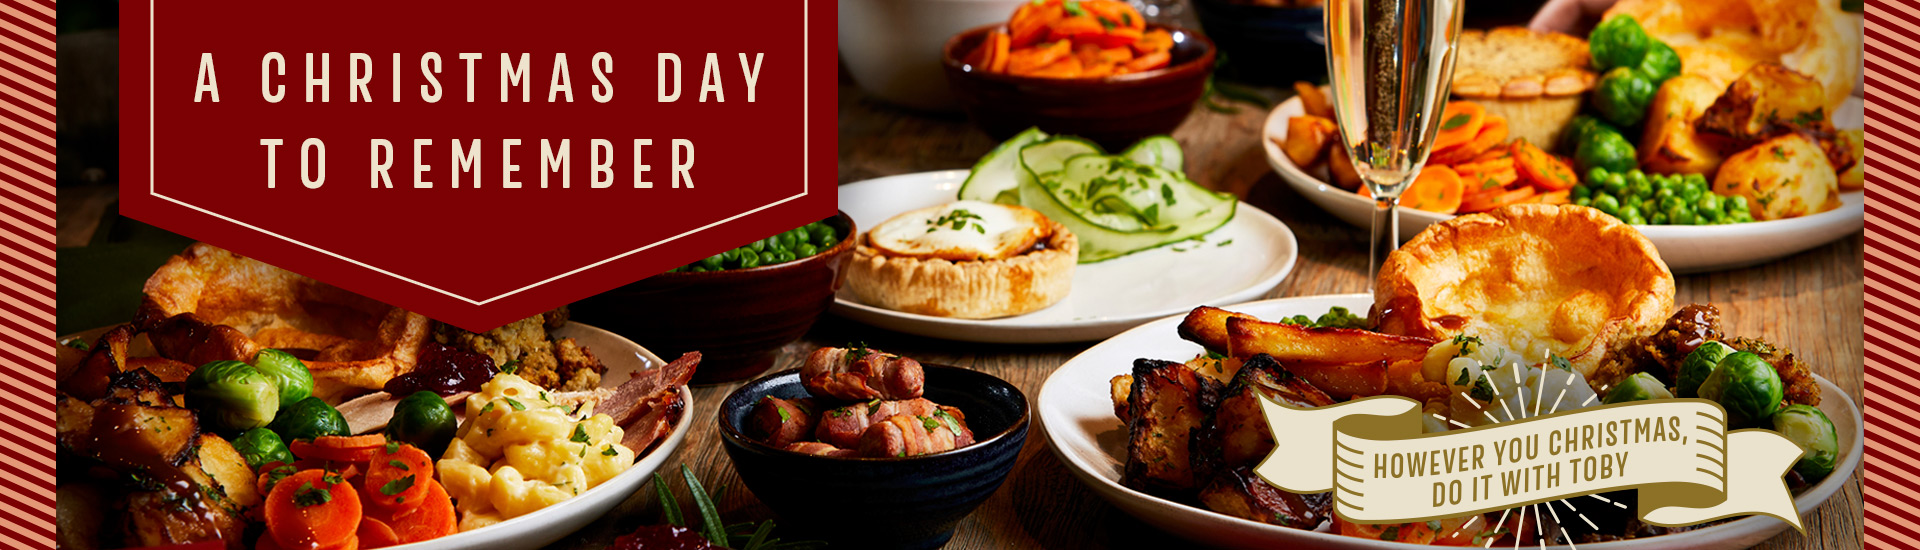 Christmas Day menu at Toby Carvery Cocket Hat